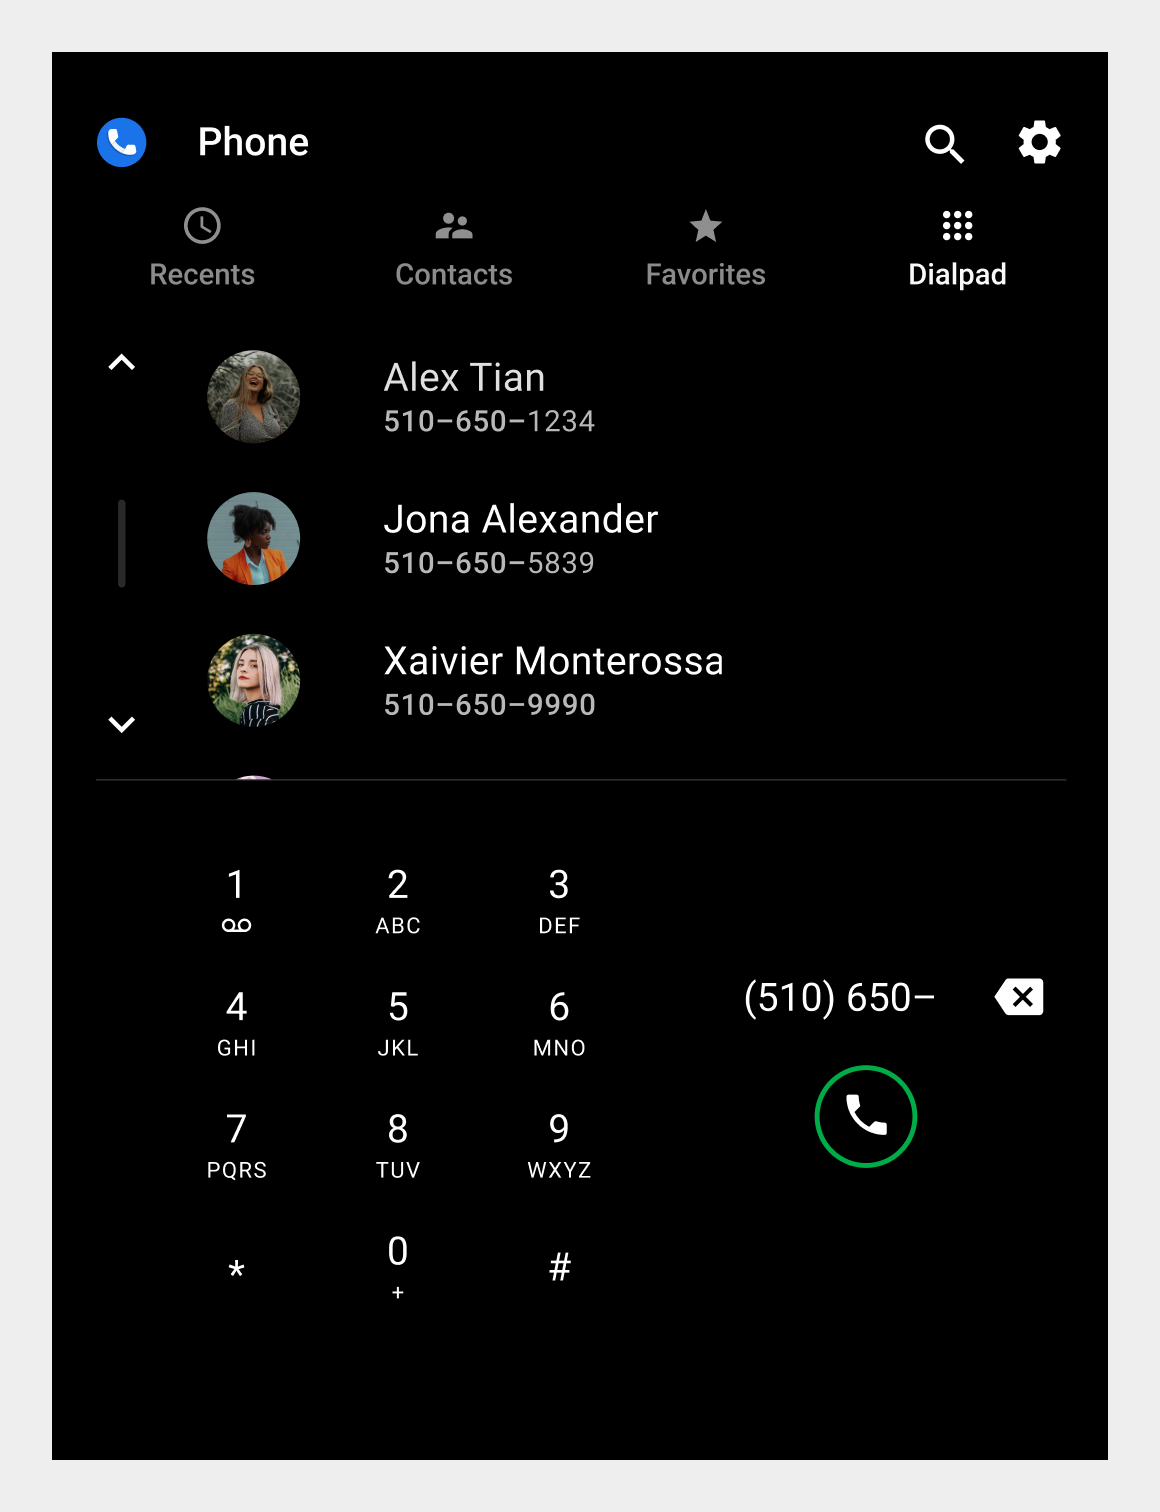 Dialpad tab portrait orientation with recognized contact